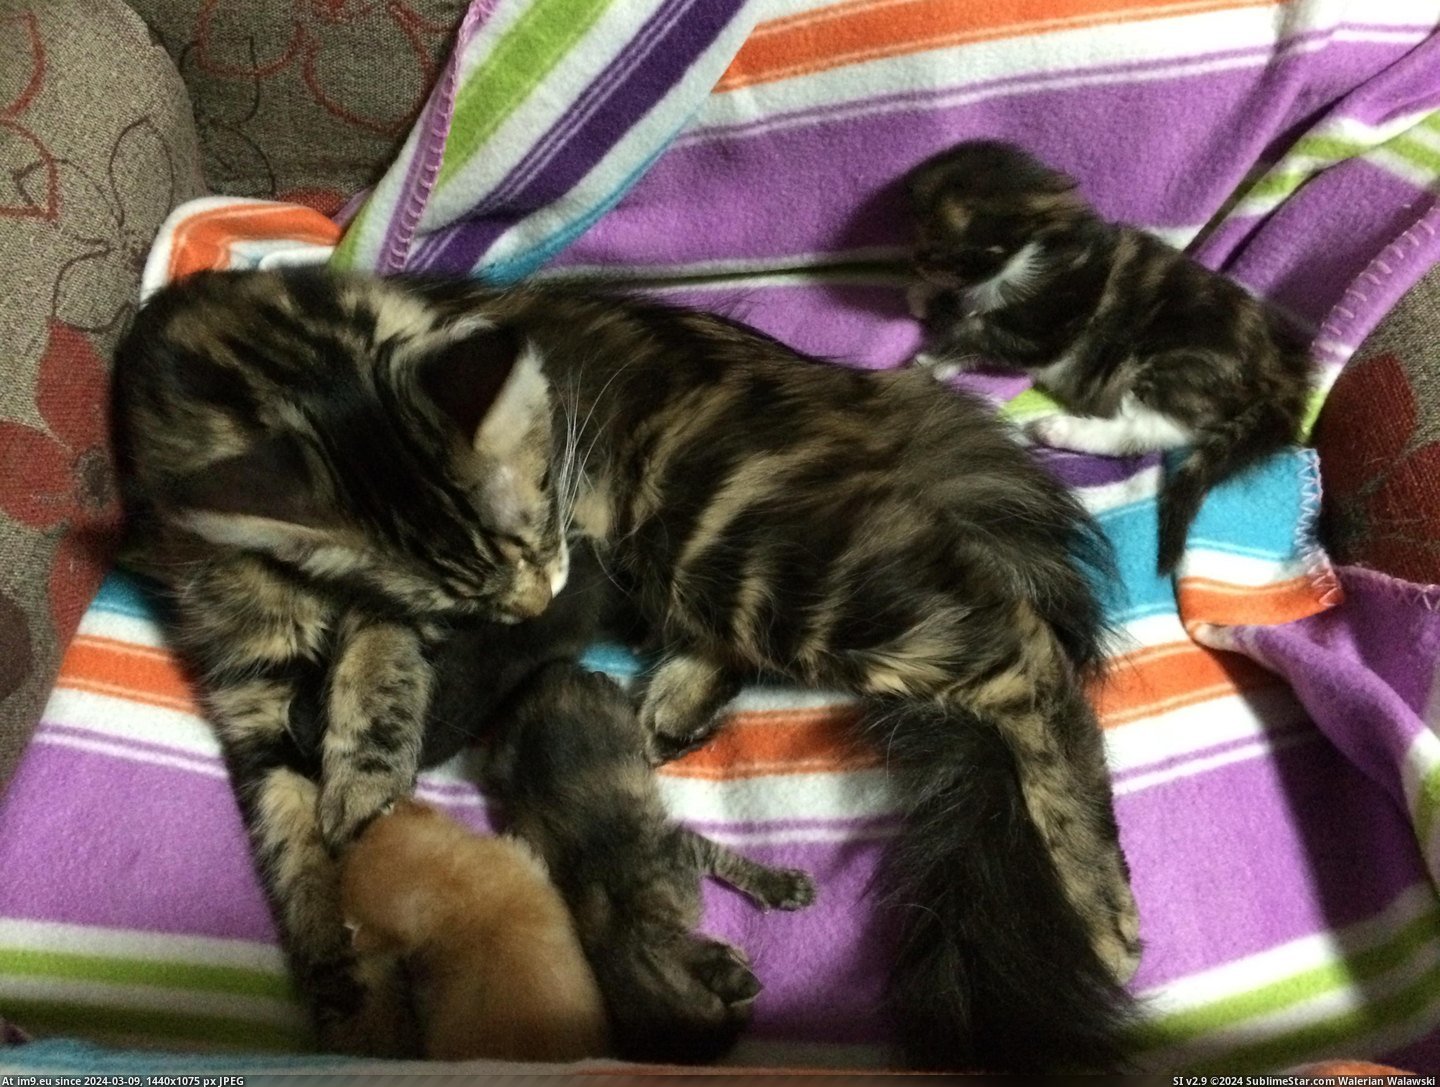 #Cats #Great #Kitten #Local #Choice #Coon #Momma #Abandoned #Kittens #Shelter #Maine [Cats] My Maine Coon momma only had 1 kitten, a local shelter had 3 abandoned kittens; we made a great choice. Pic. (Obraz z album My r/CATS favs))